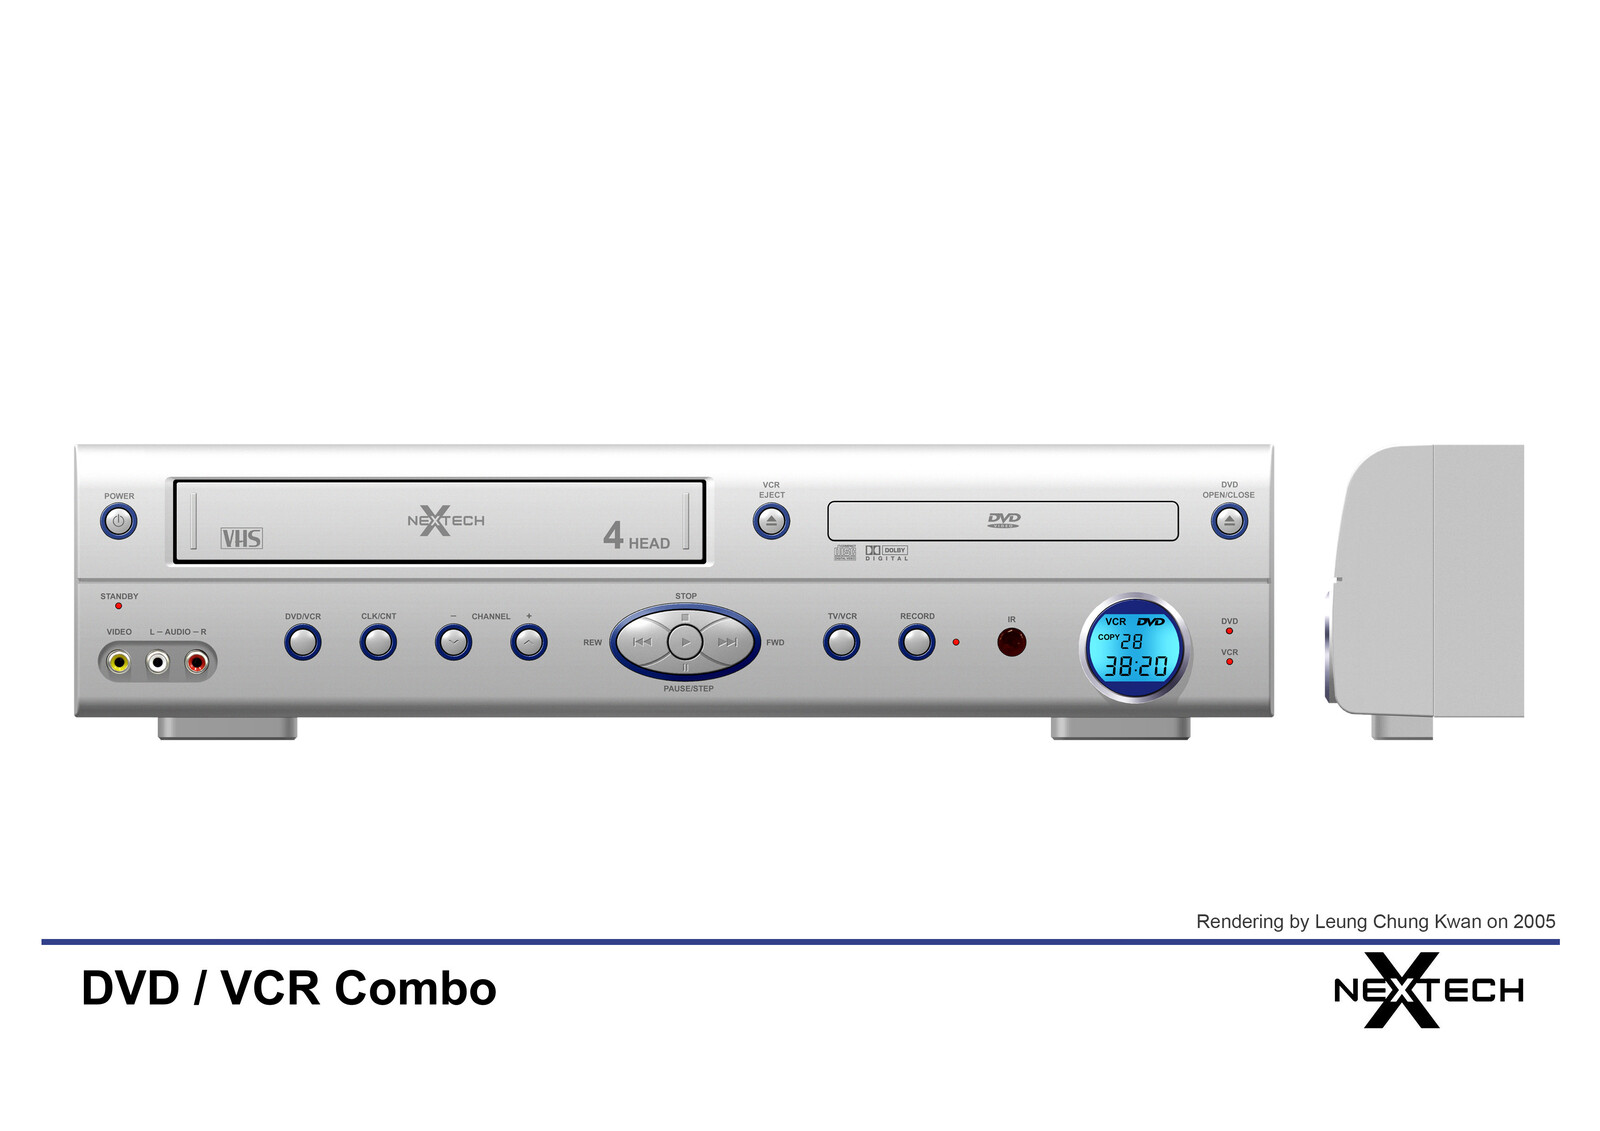 💎 DVD / VCD Combo | Rendering by Leung Chung Kwan on 2005 💎
Brand Name︰NEXTECH | Client︰Star Light Electronics Co., Ltd.